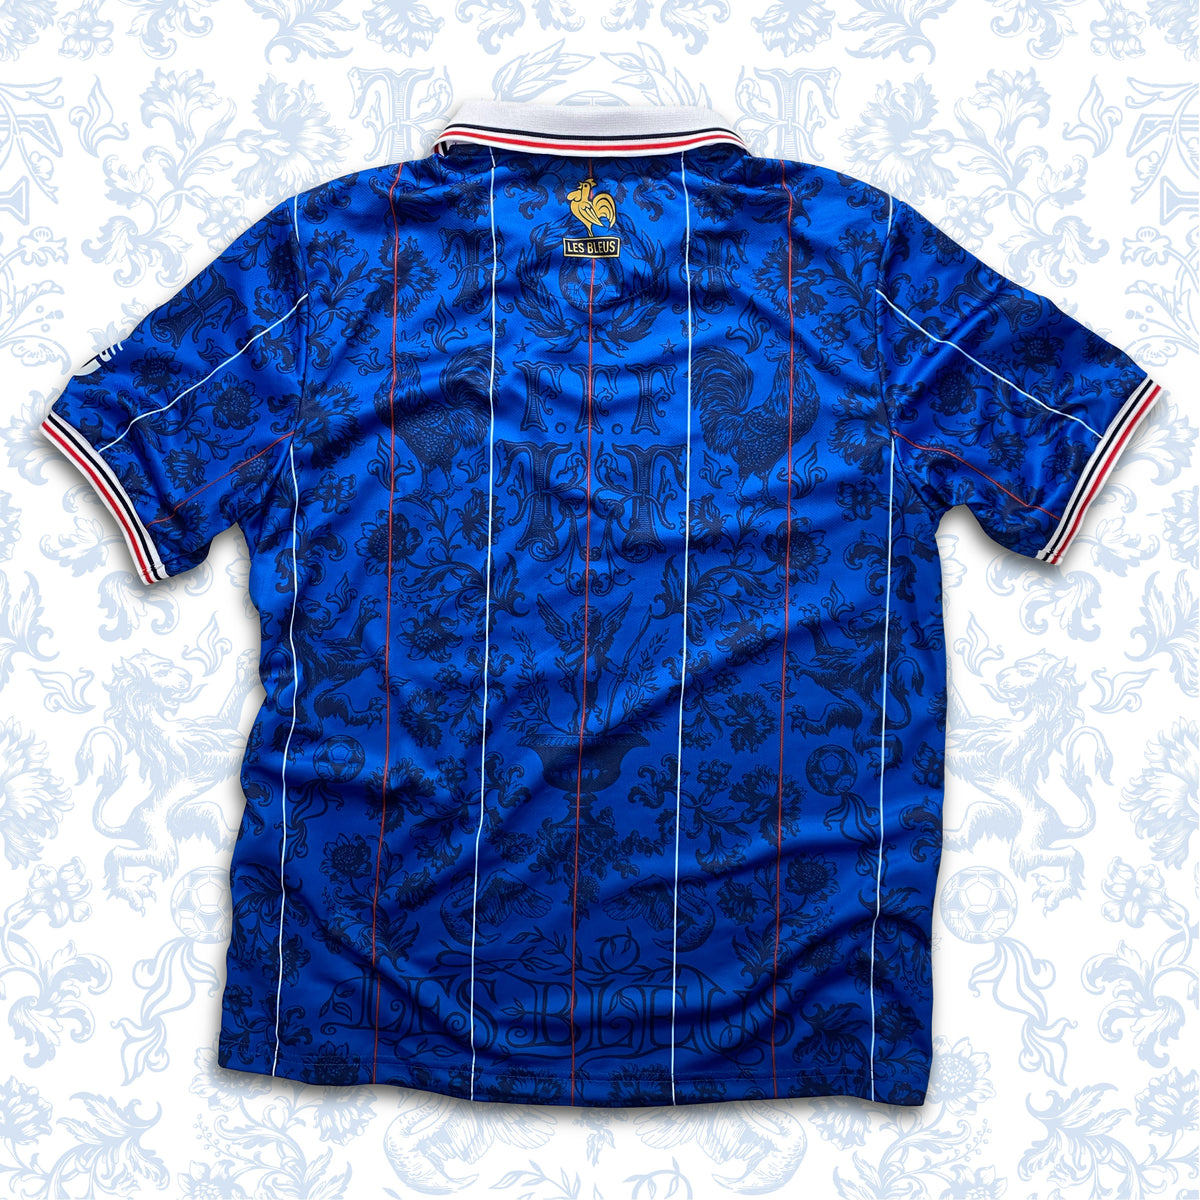 FRANCE 'CHATEAU LIFE' HOME JERSEY